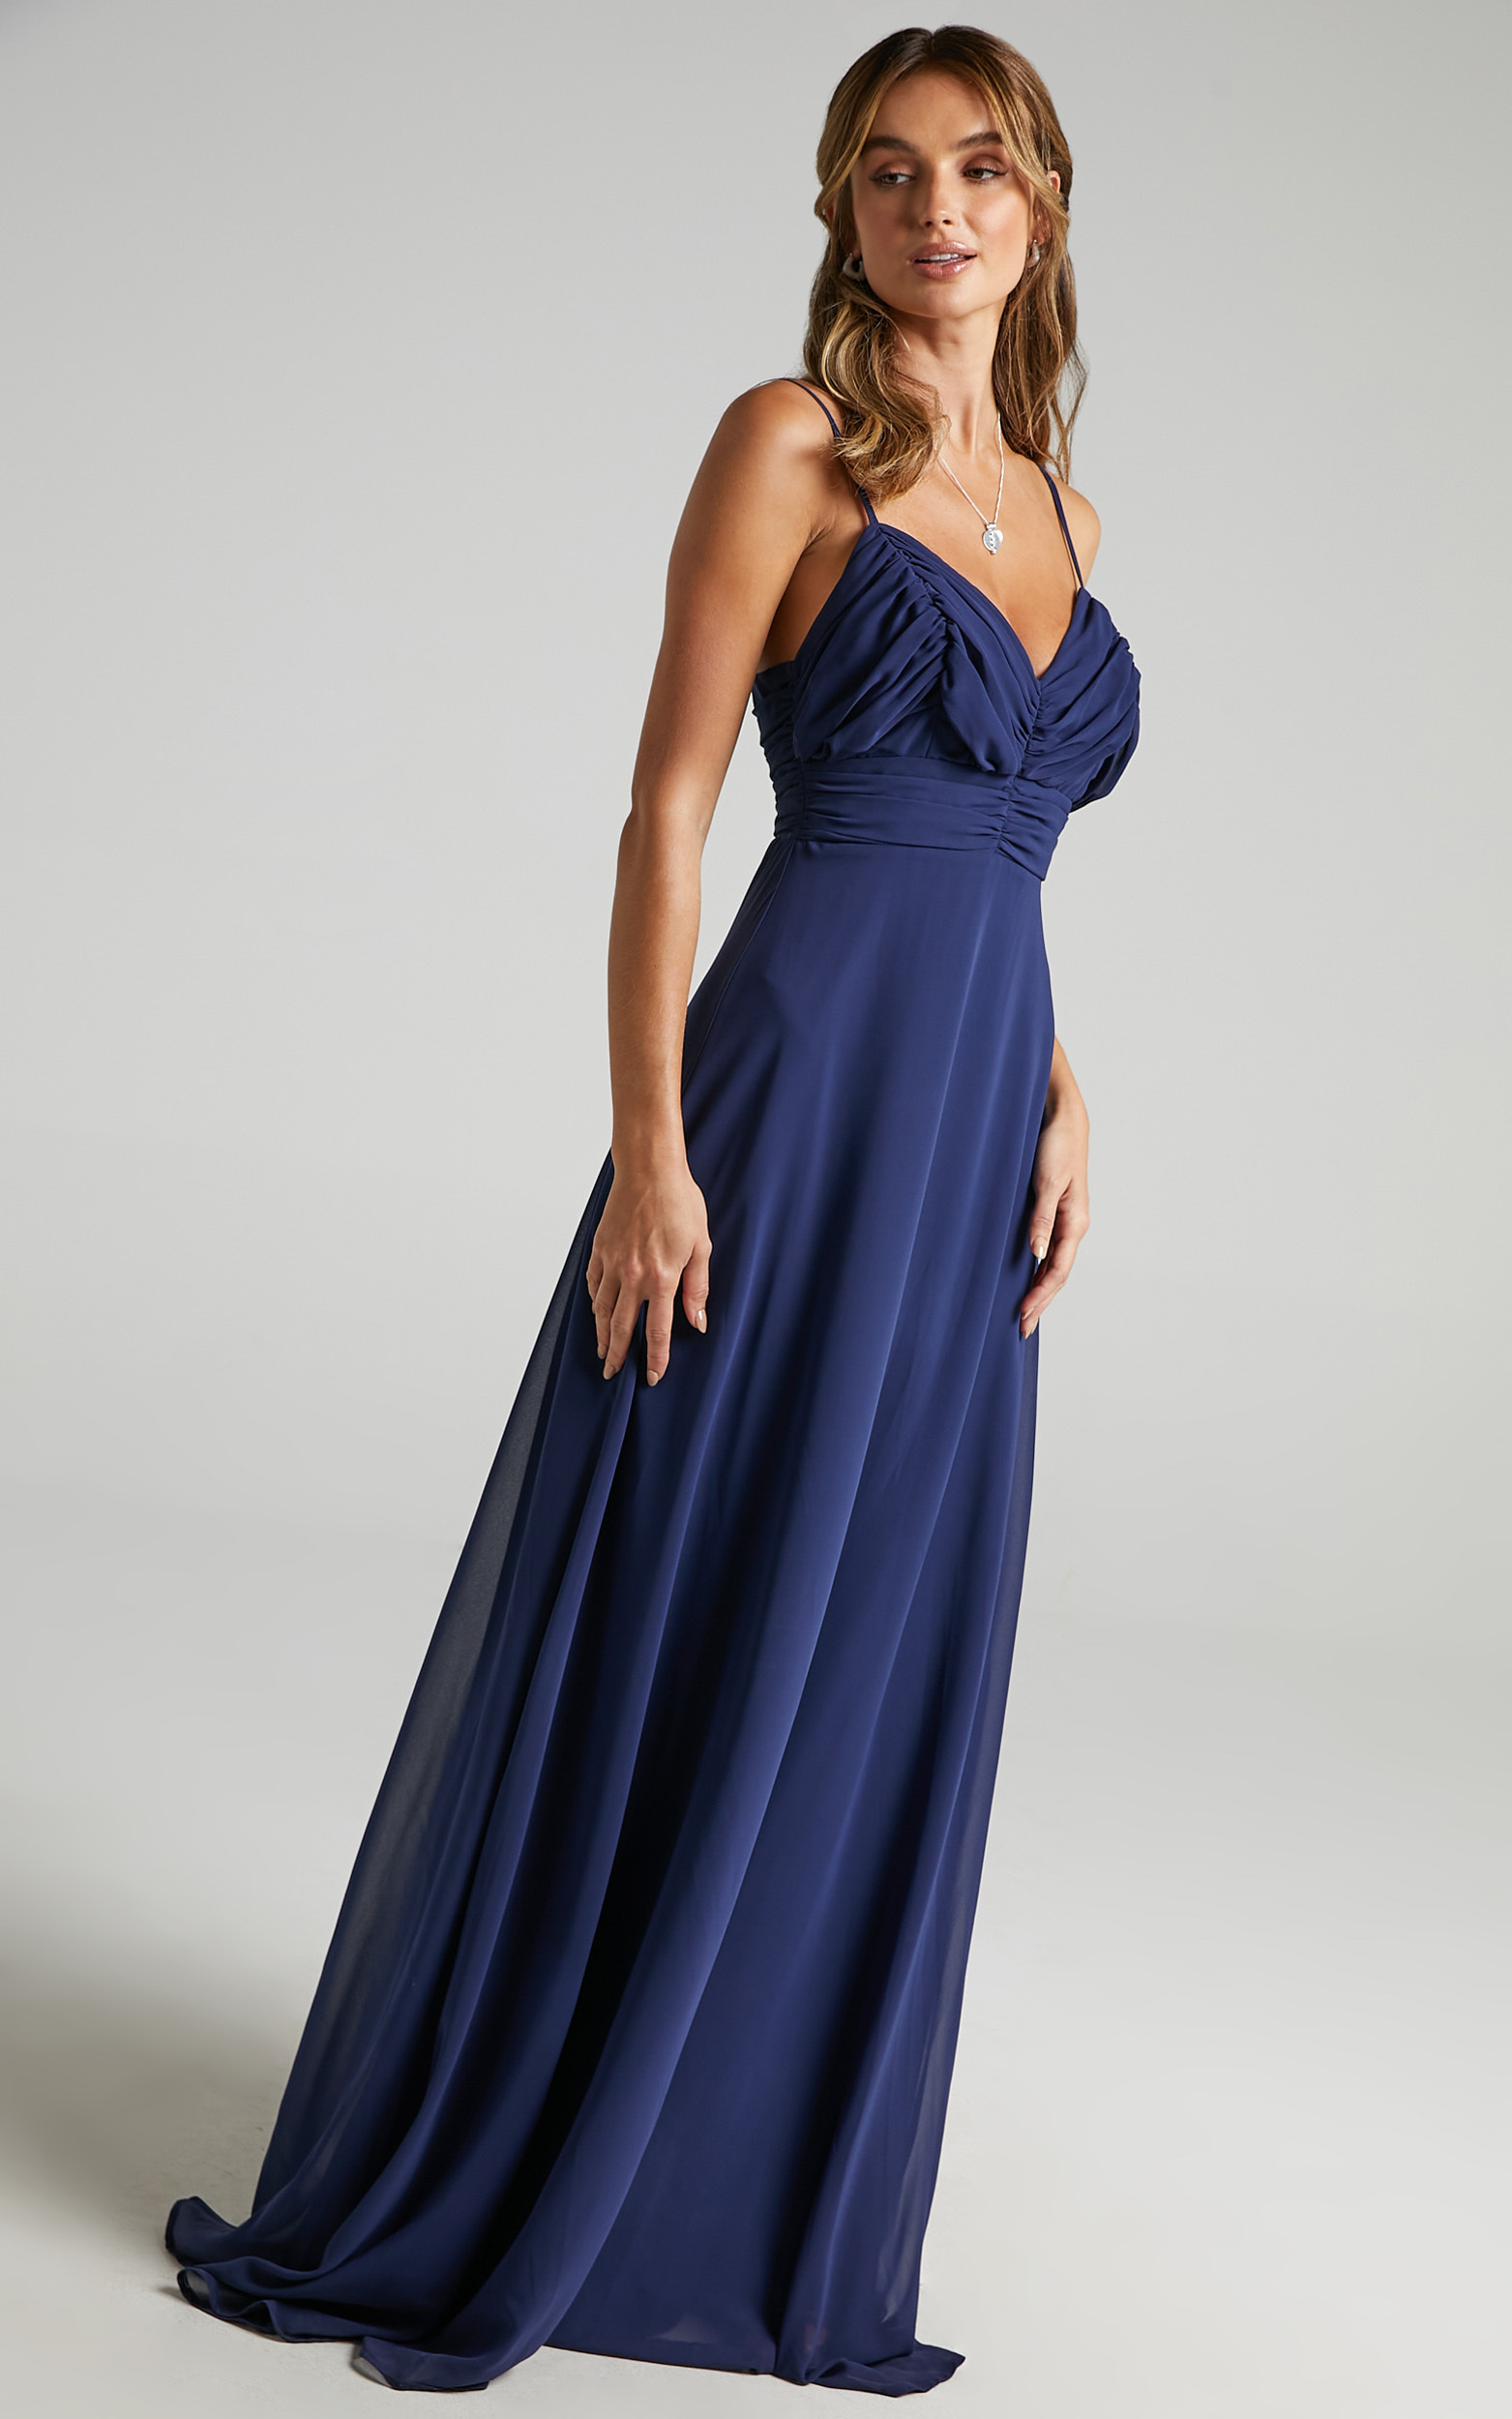 Just One Dance Dress in Navy - 06, NVY1, hi-res image number null